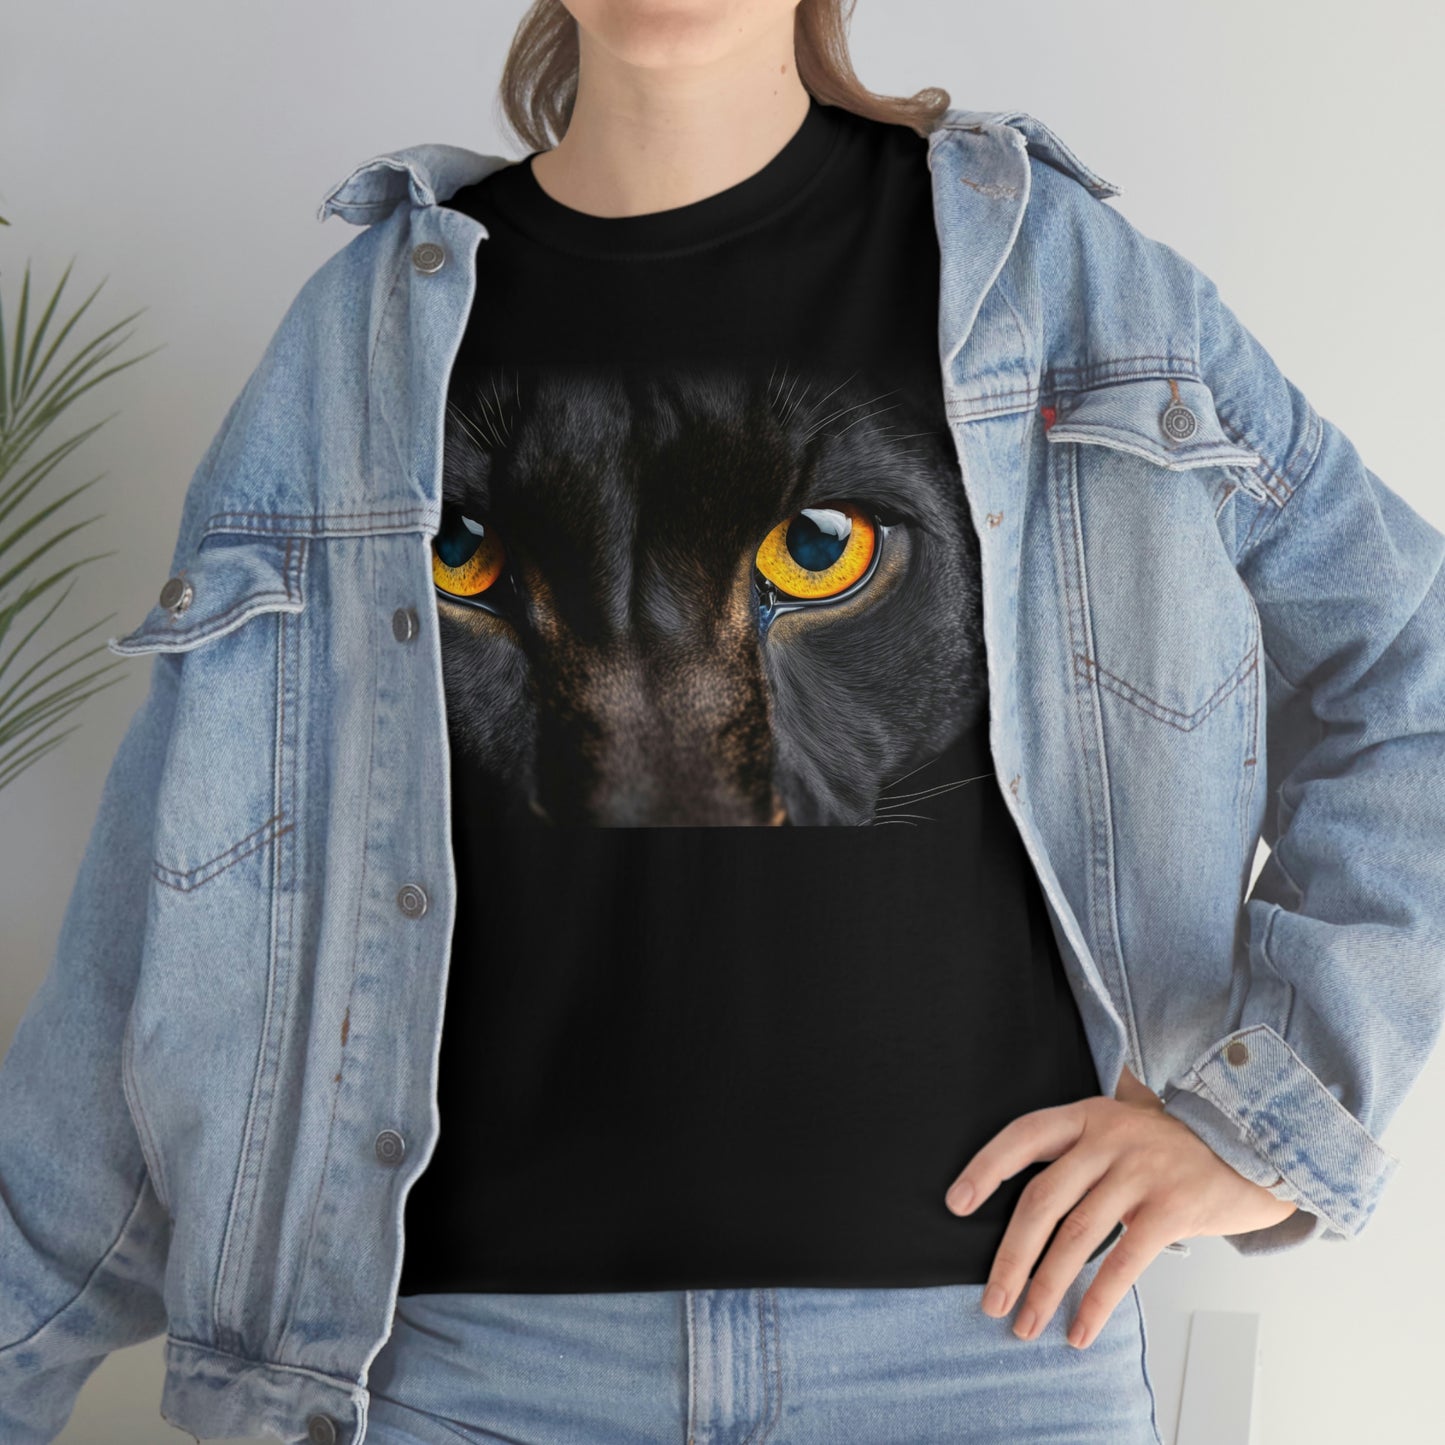 Get Noticed with Our Black Cat Eyes T-Shirt - Perfect for Cat Lovers and Those Who Love Unique Apparel!